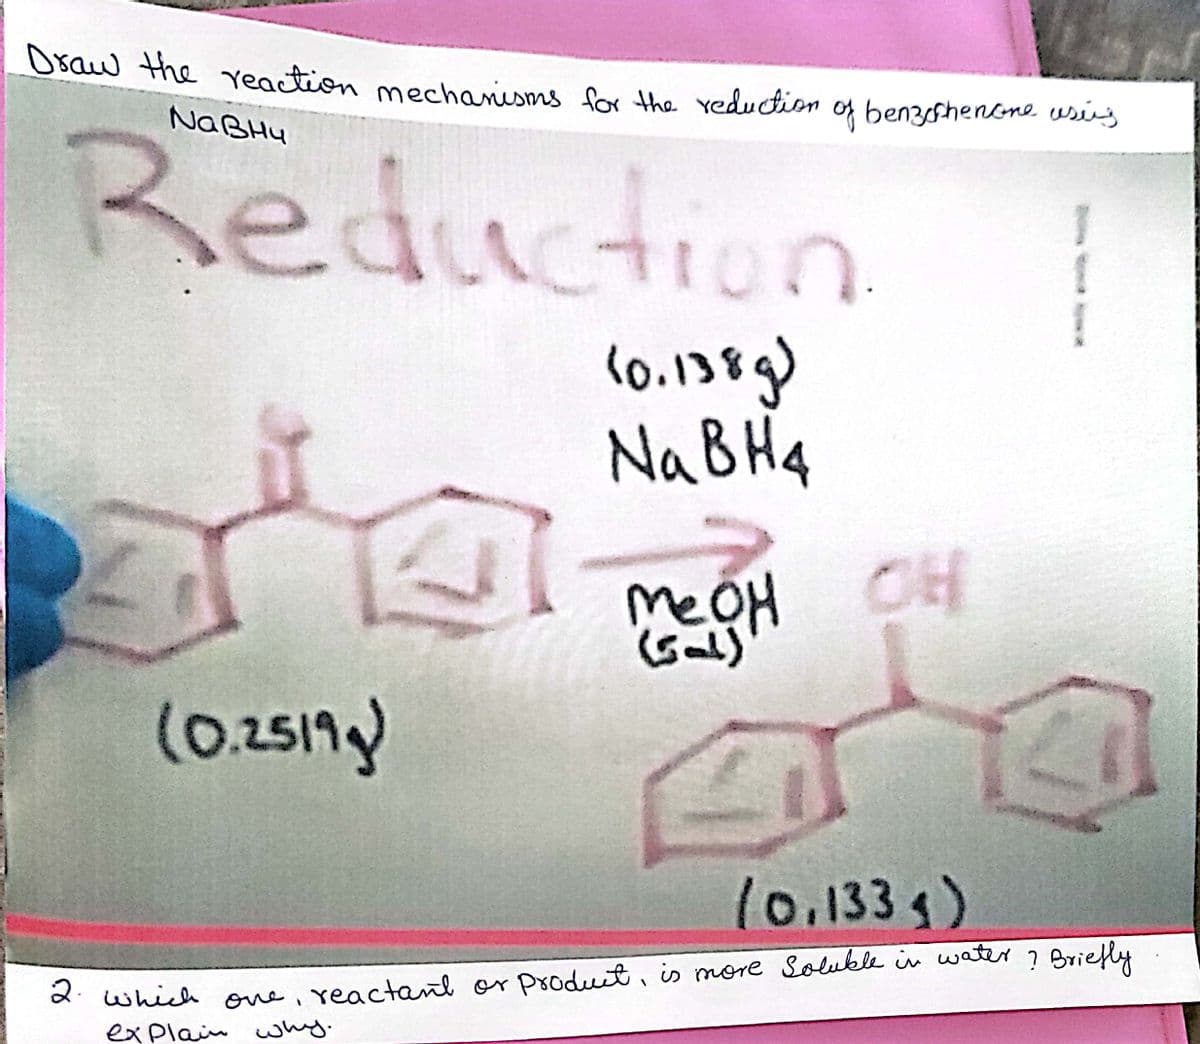 Usaw the eaction mechanisms for the reduction of benzshenene usig
NABHU
Reduction
(0.138g)
NaBH4
Me
eOH CH
Gal)
(0.2517g)
l0.1335)
d which one, reactant or produit, is more Solukle in water ? Briefly
explain why.
